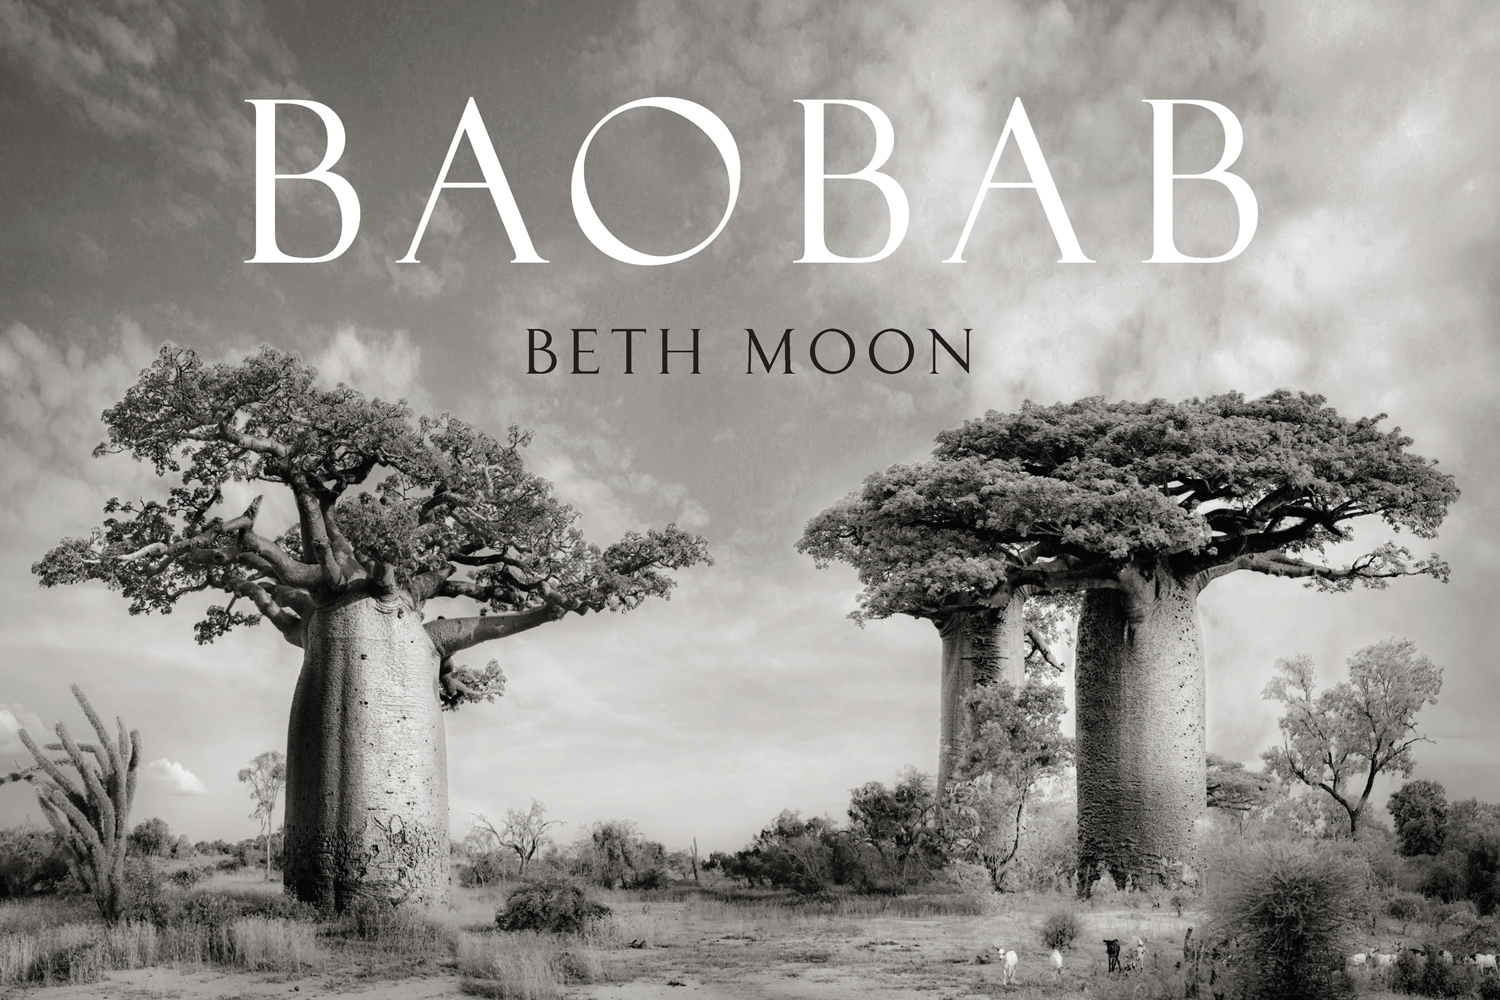 Dramatic sepia landscape photo of 4 large Baobab trees with impressive trunks and Baobab in white font above